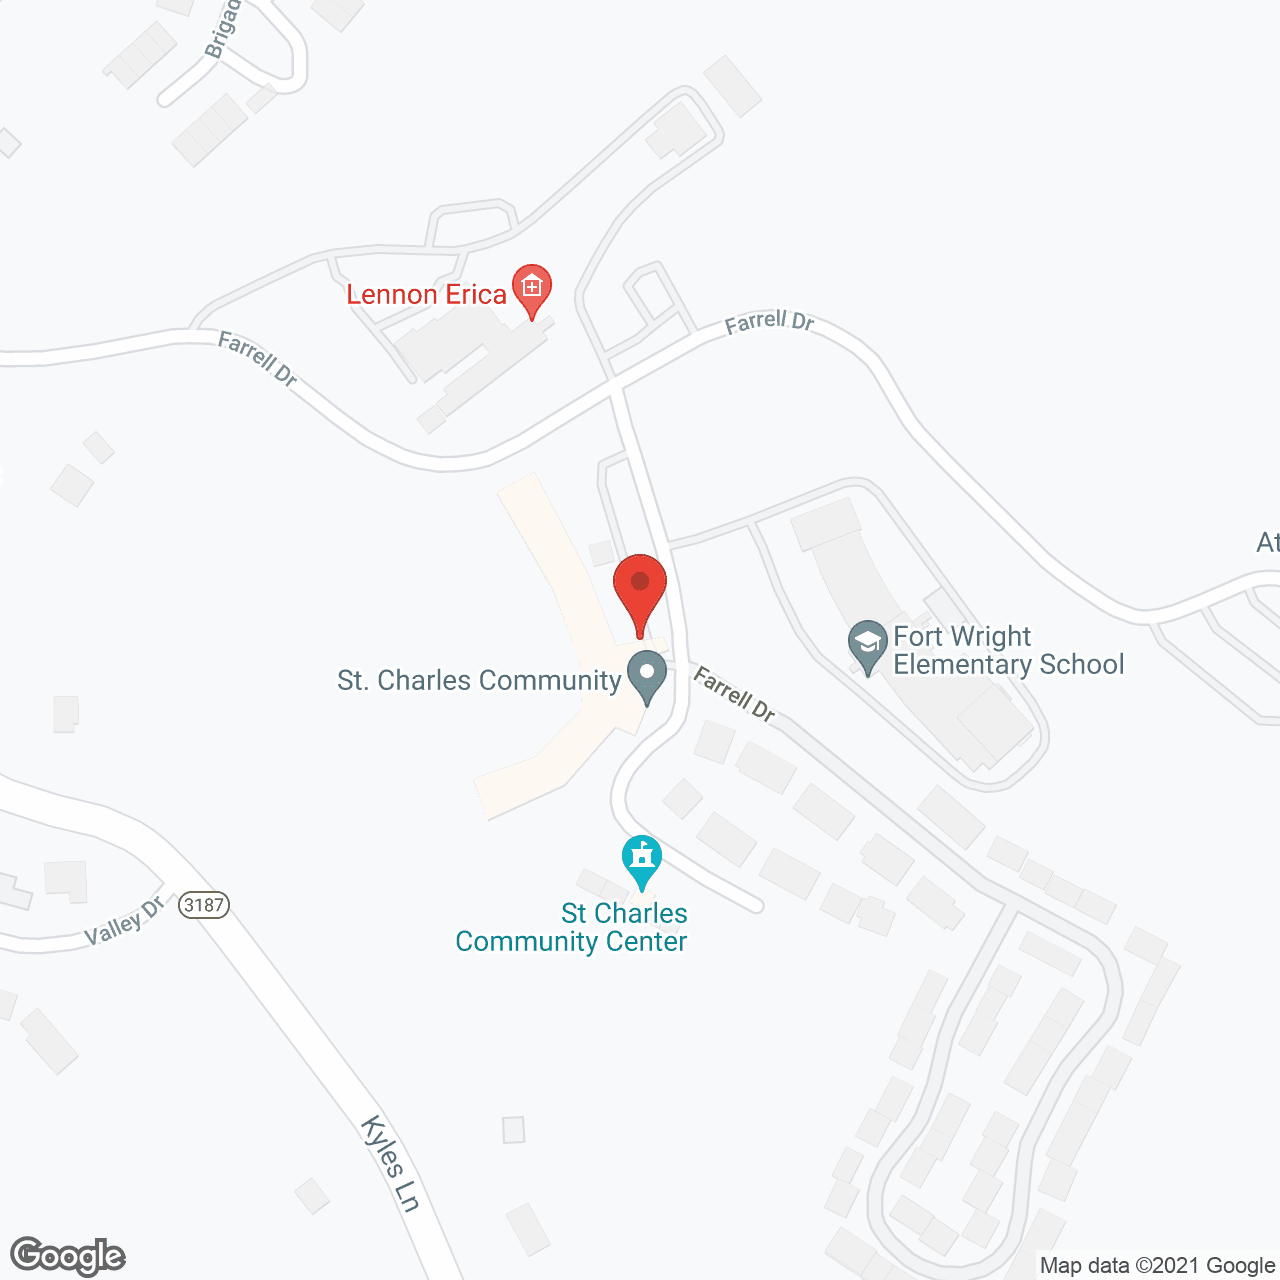 St. Charles Community in google map